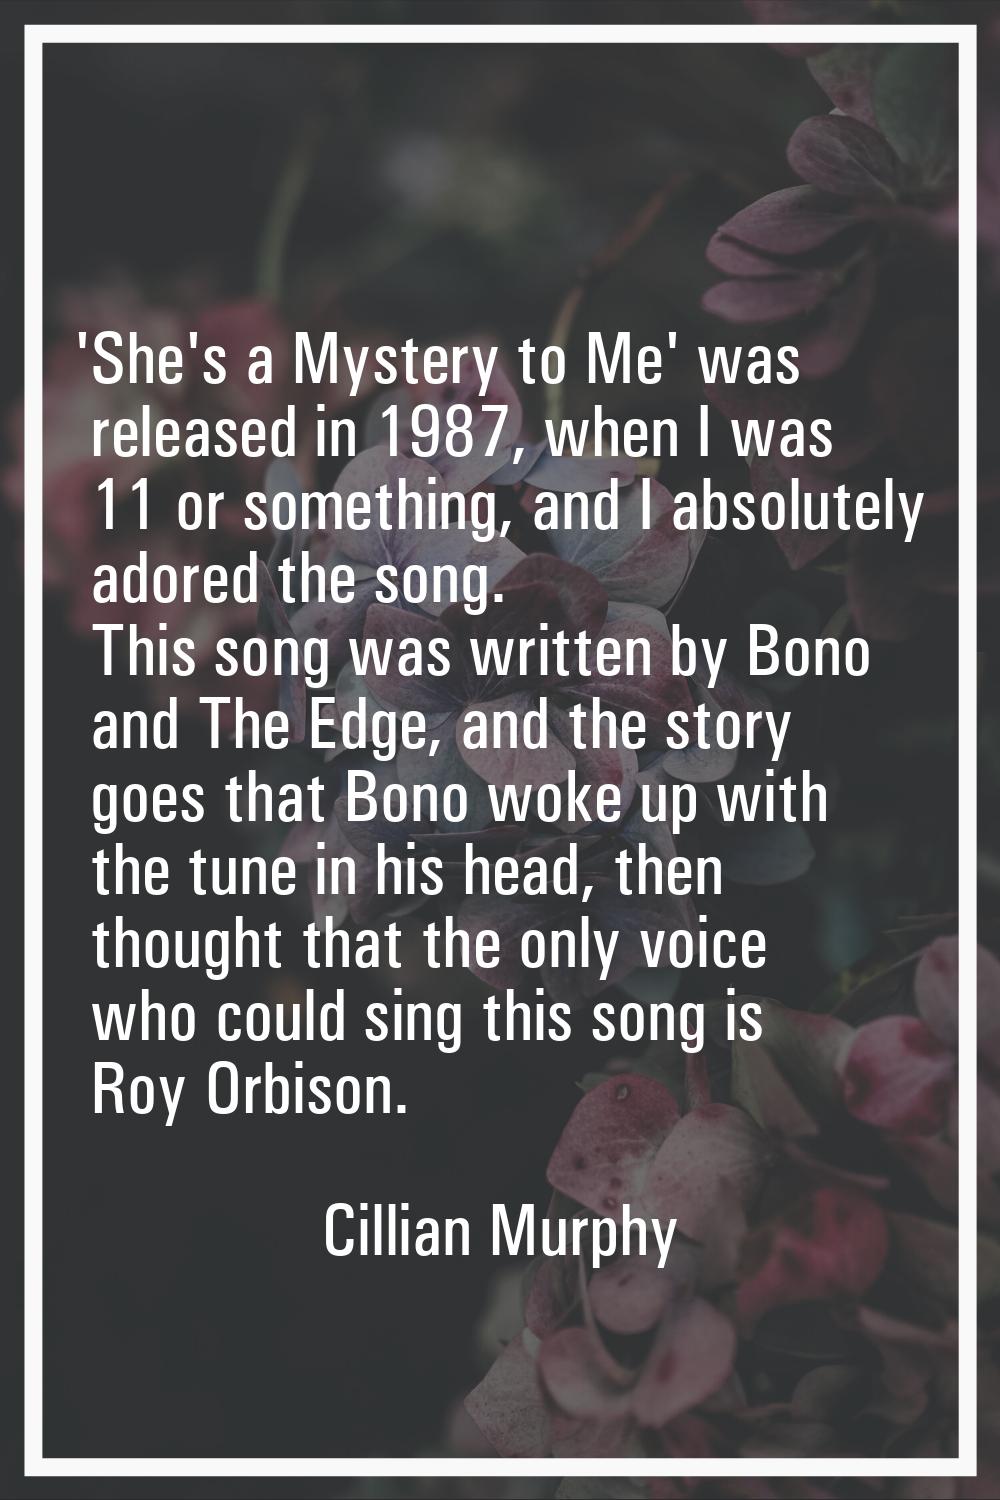 'She's a Mystery to Me' was released in 1987, when I was 11 or something, and I absolutely adored t